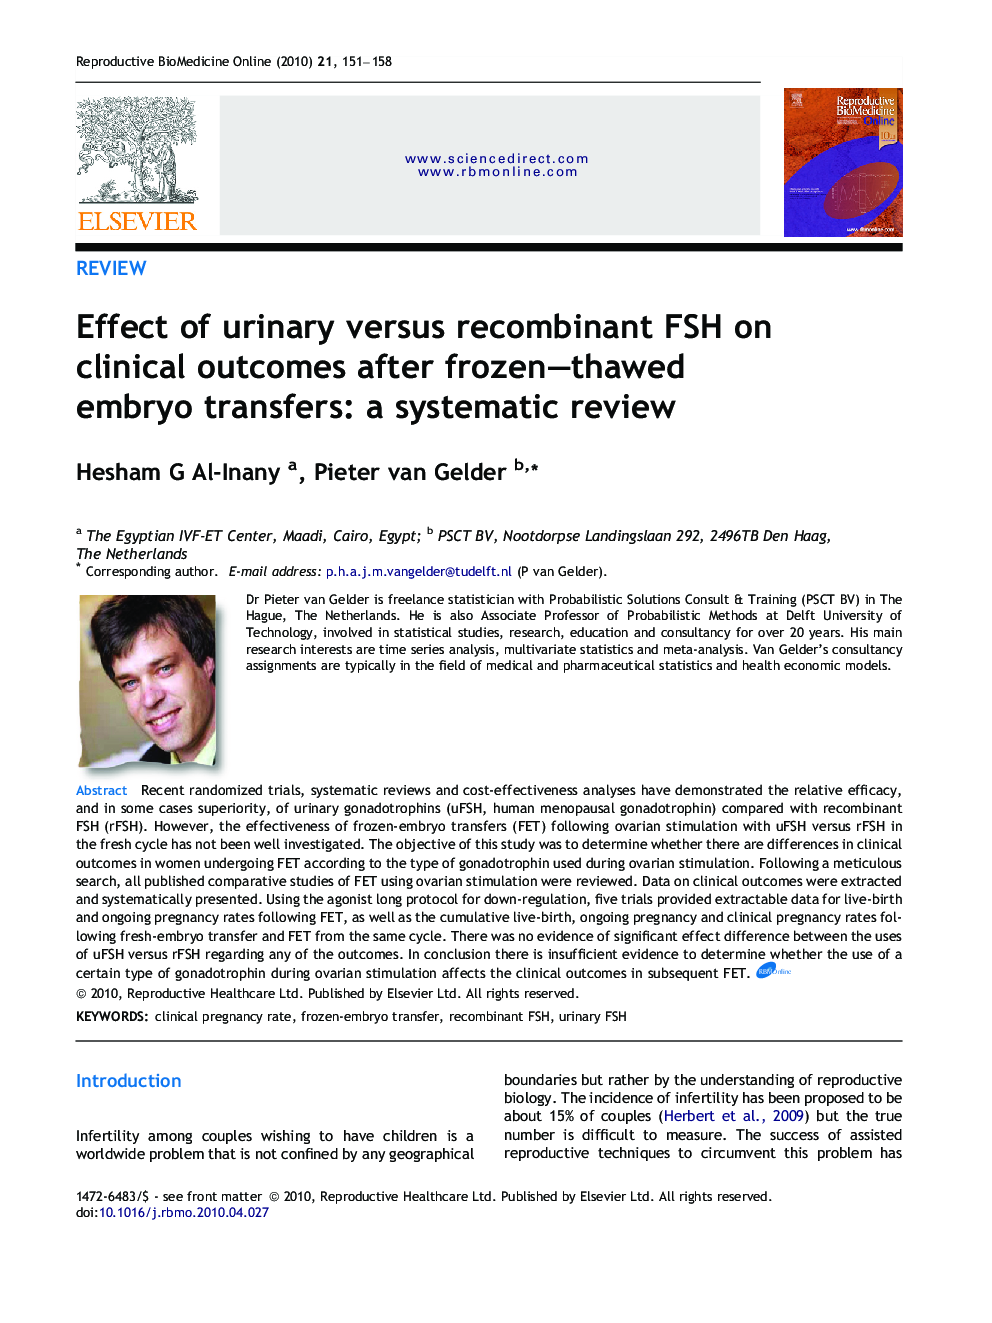 Effect of urinary versus recombinant FSH on clinical outcomes after frozen–thawed embryo transfers: a systematic review 